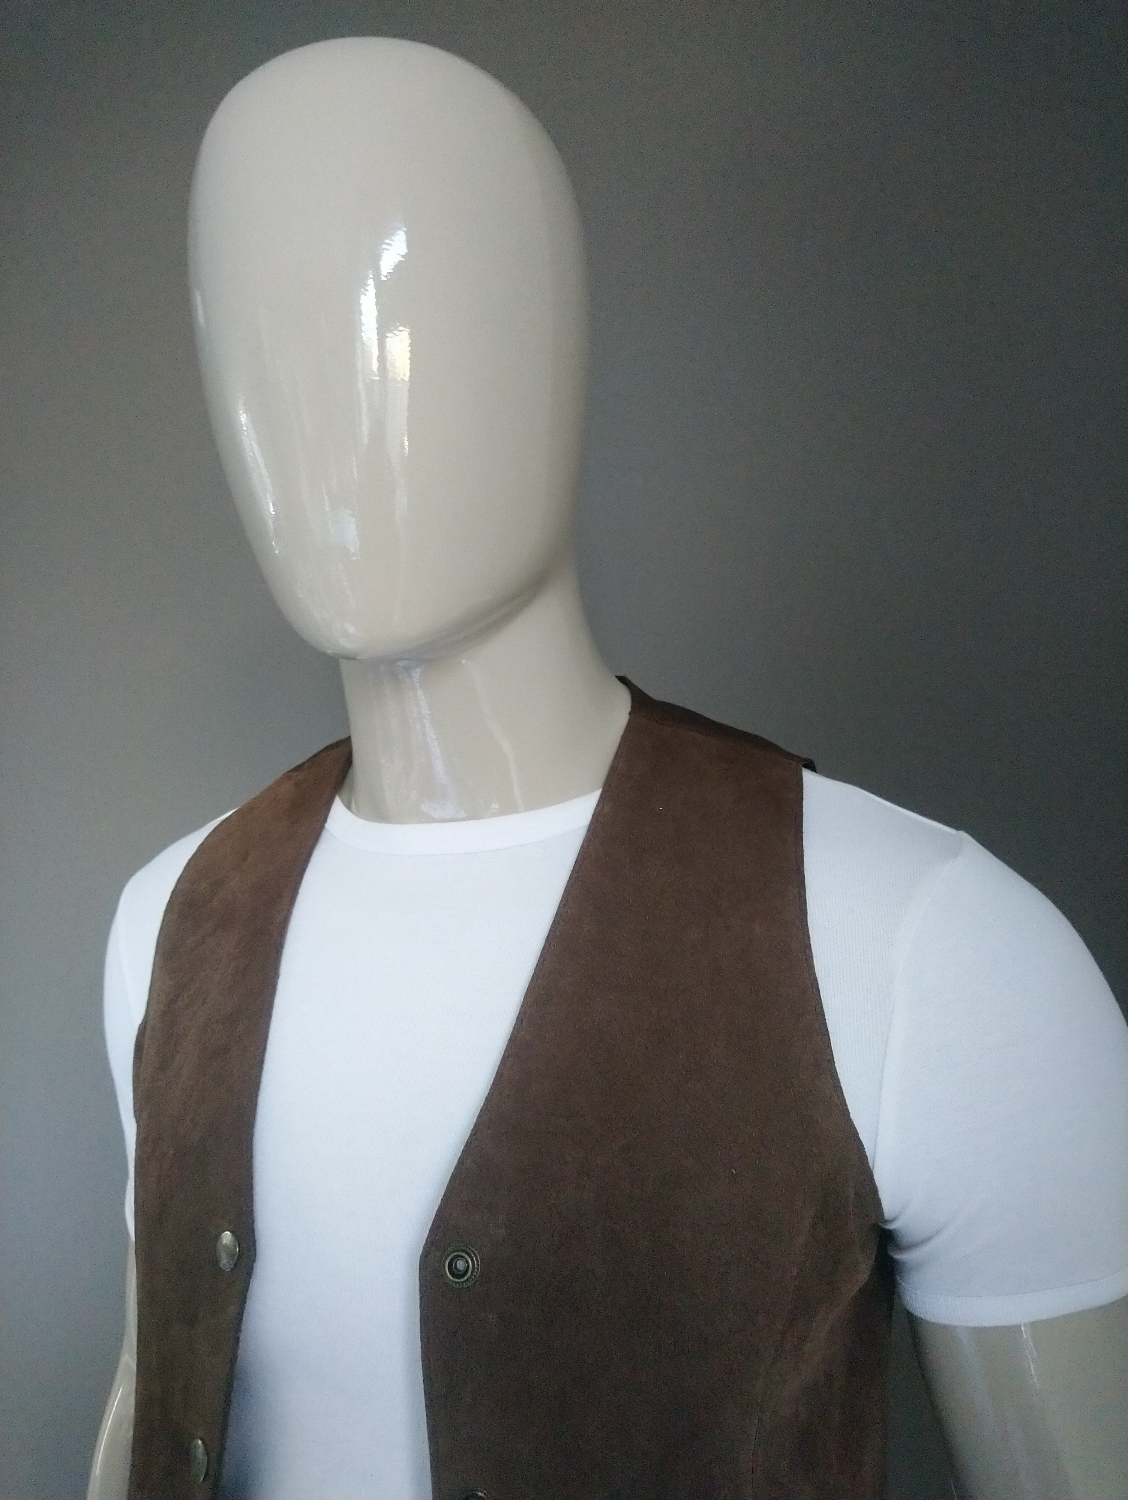 Leather waistcoat of swine leather with press studs. Brown colored. Size M.